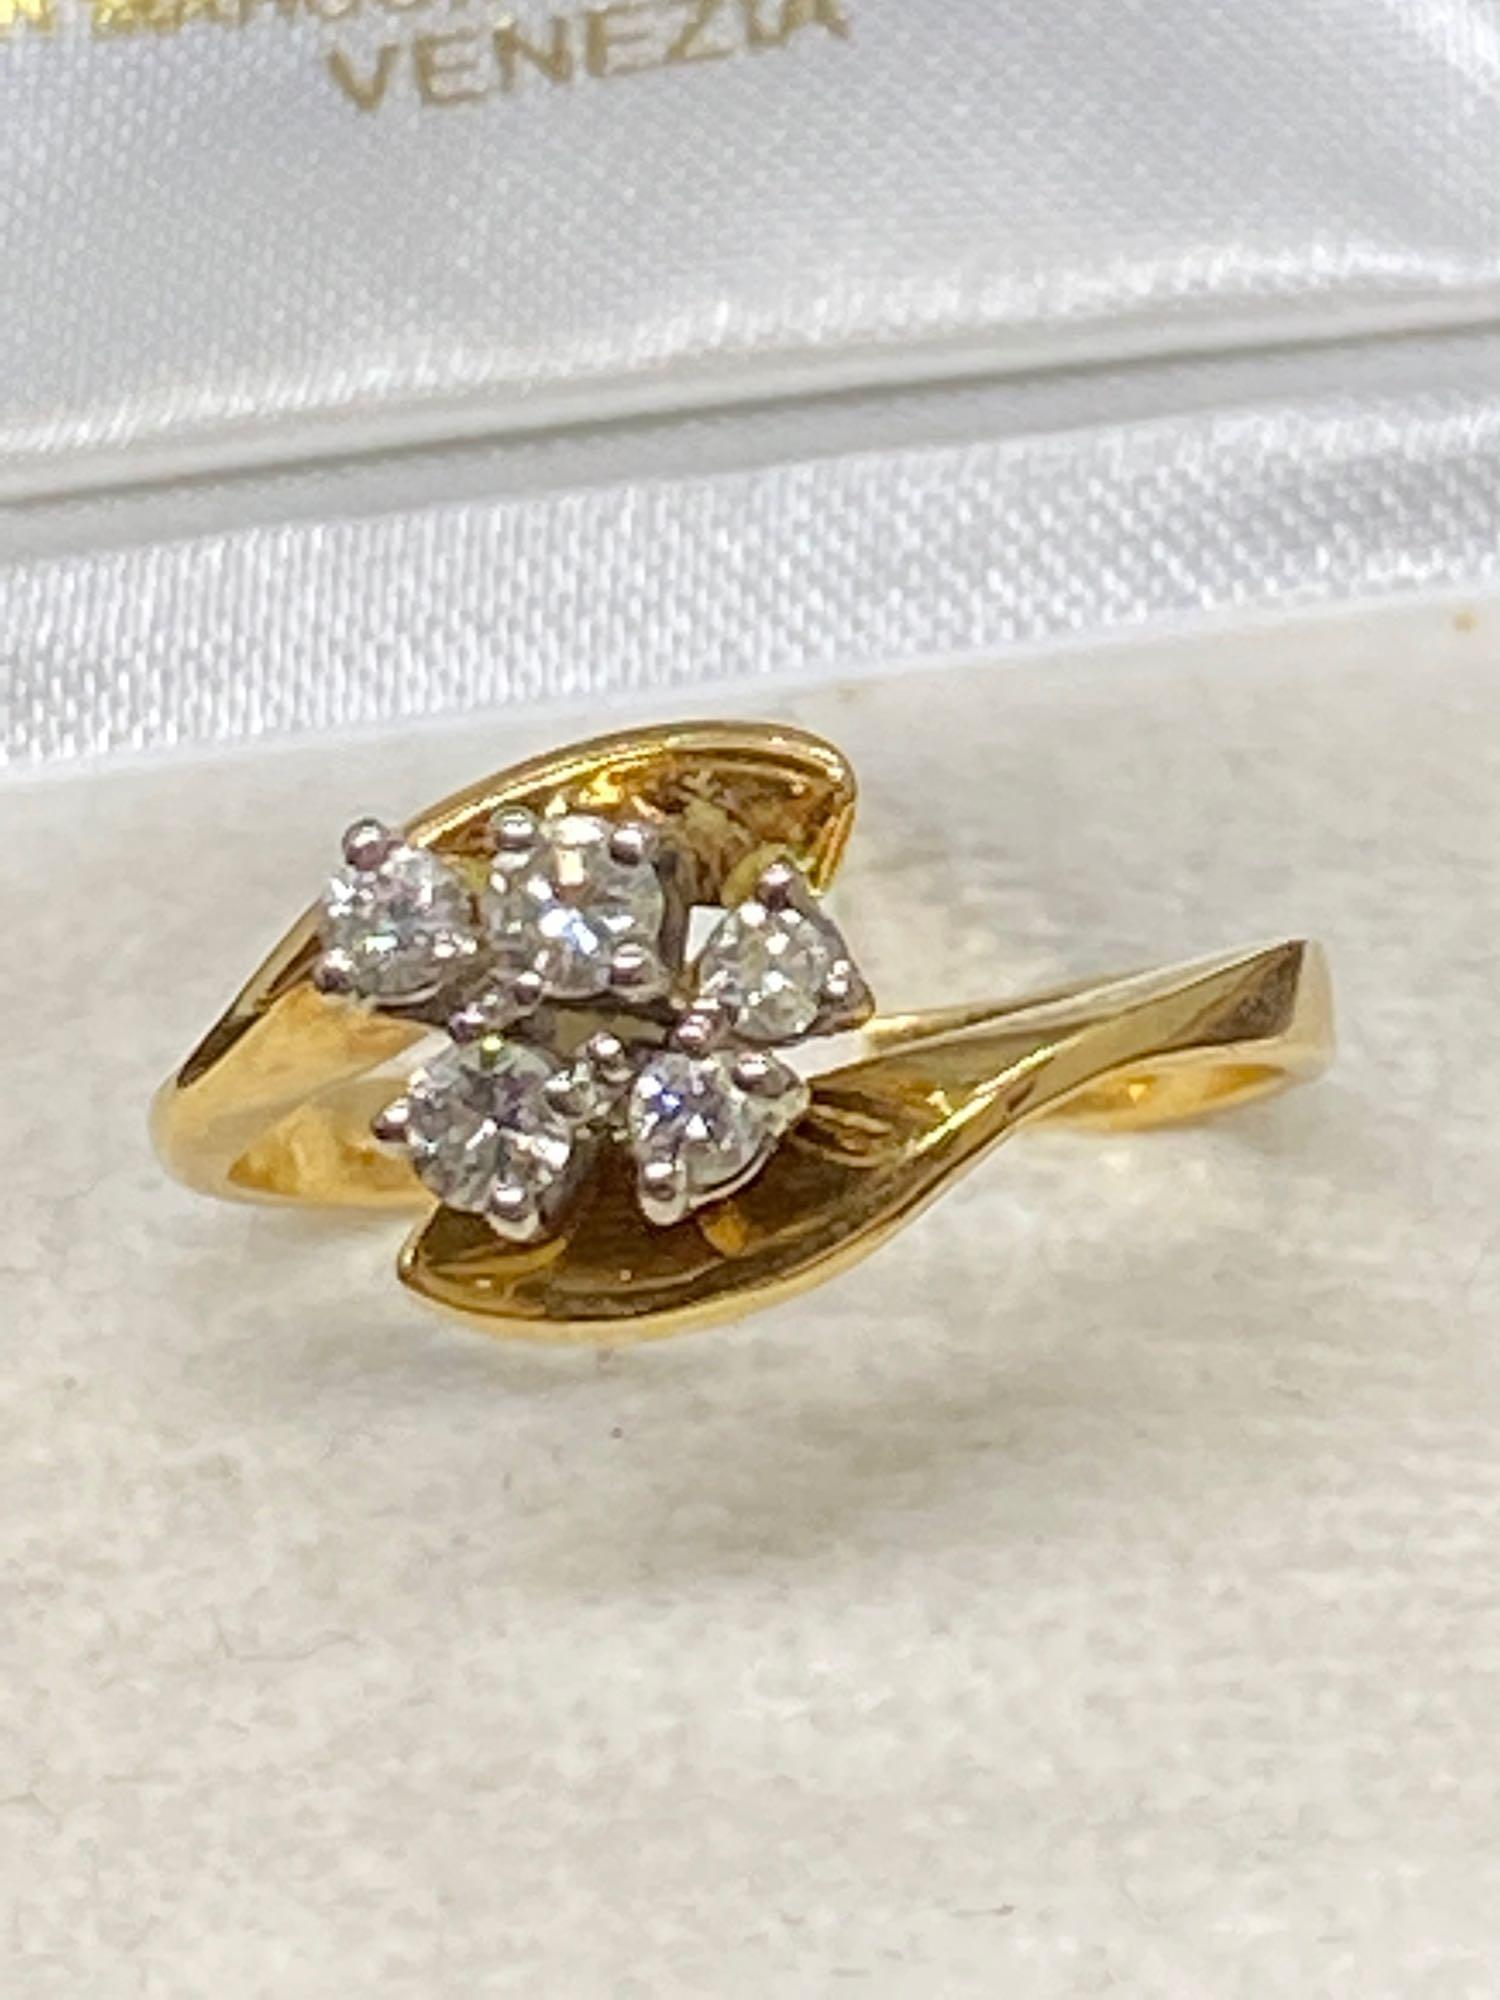 18ct Gold 0.50ct G/H-VS/SI Diamond Ring - 4 Grams - Approx Size Q